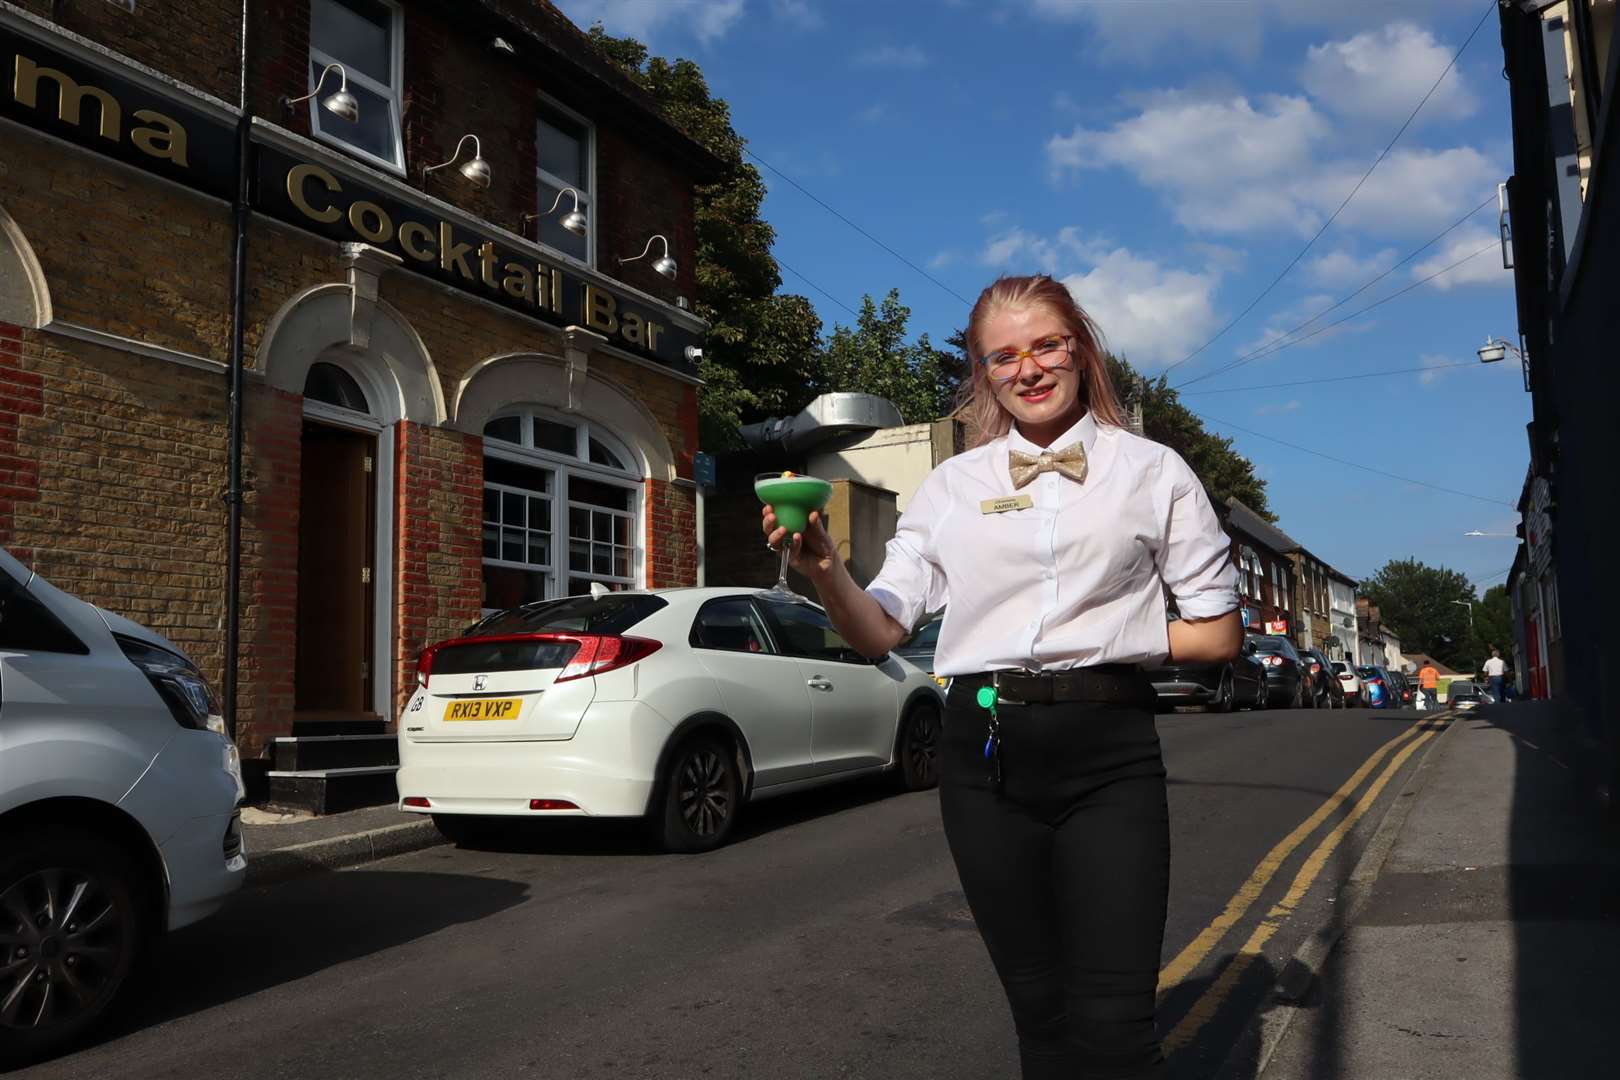 Amber Haddon with a cocktail outside the old King's Arms pub in Minster village, Sheppey, now relaunched as Charisma Cocktails